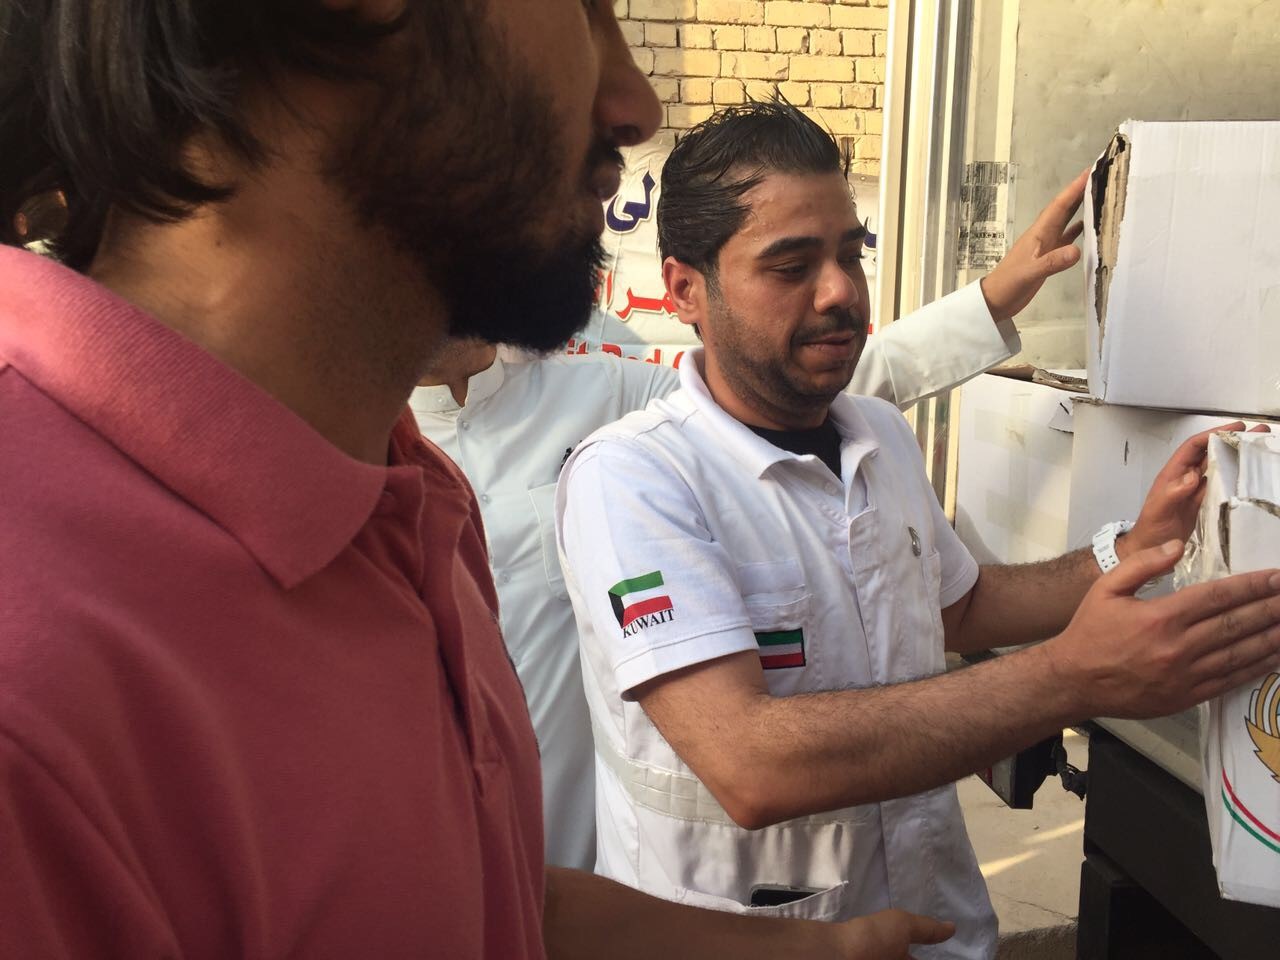 Kuwait continued to deliver aid to Iraq's third largest city of Basra